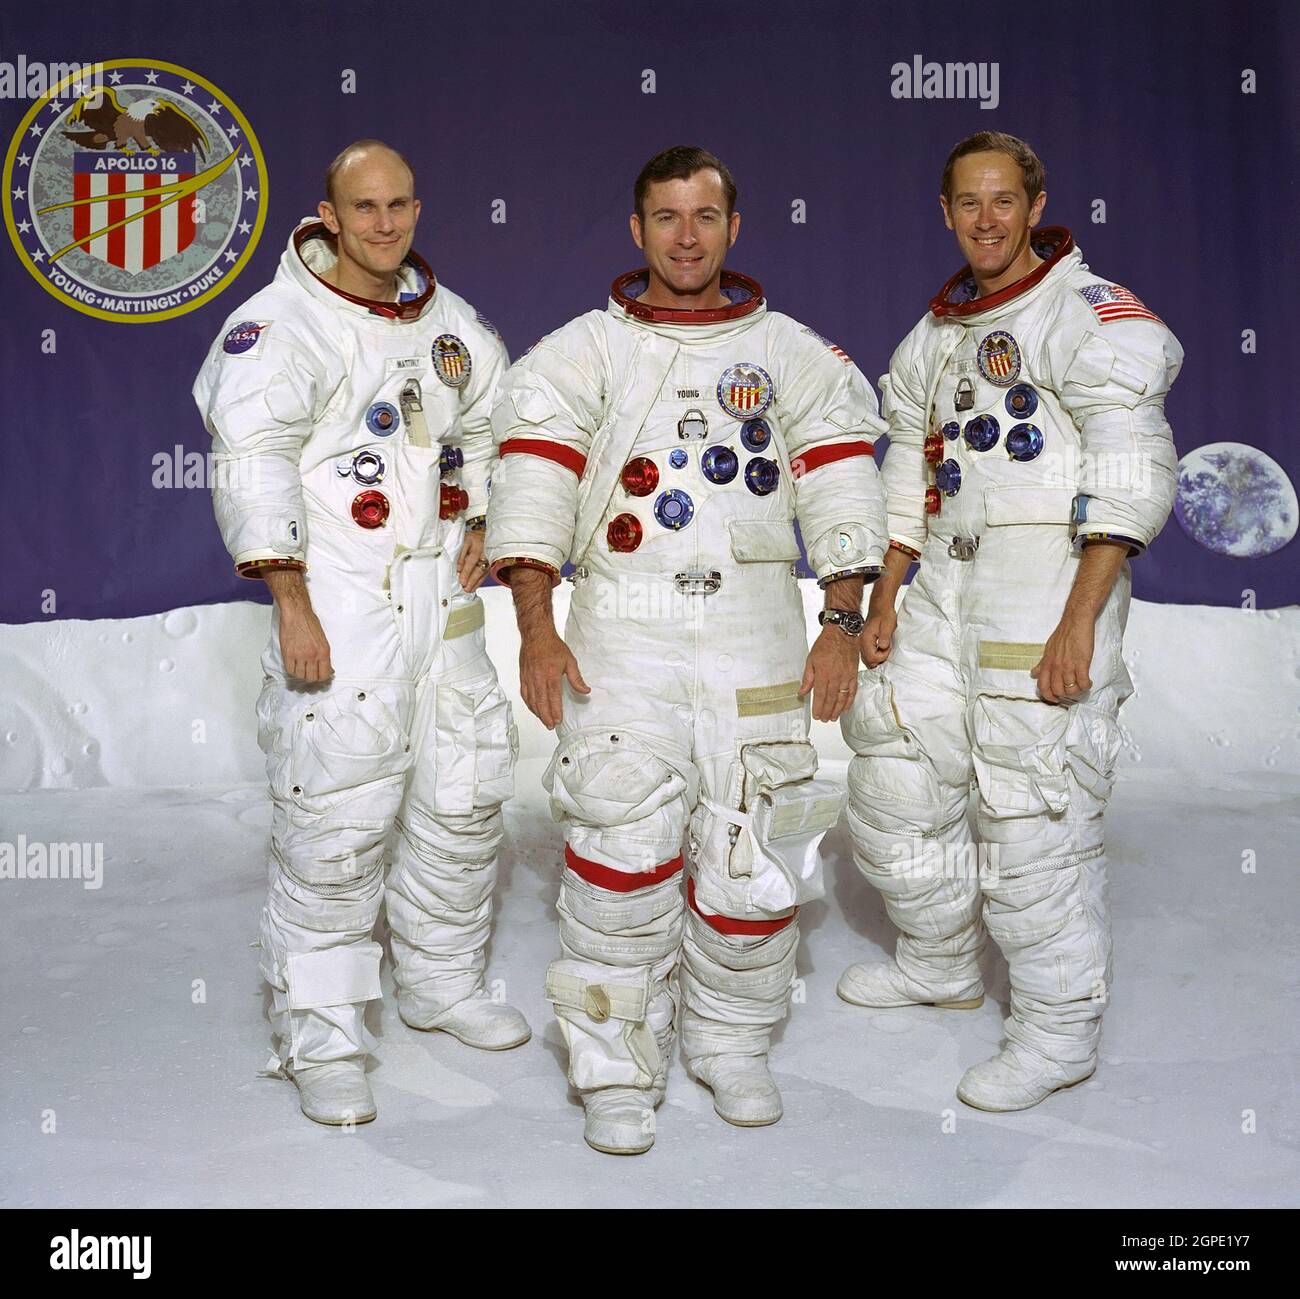 PORTRAIT: APOLLO 16 CREW 01-12-72, Pictured from left to right are: Thomas K. Mattingly II, Command Module pilot; John W. Young, Mission Commander; and Charles M. Duke Jr., Lunar Module pilot. Launched from the Kennedy Space Center on April 16, 1972, Apollo 16 spent three days on Earth's Moon. Stock Photo